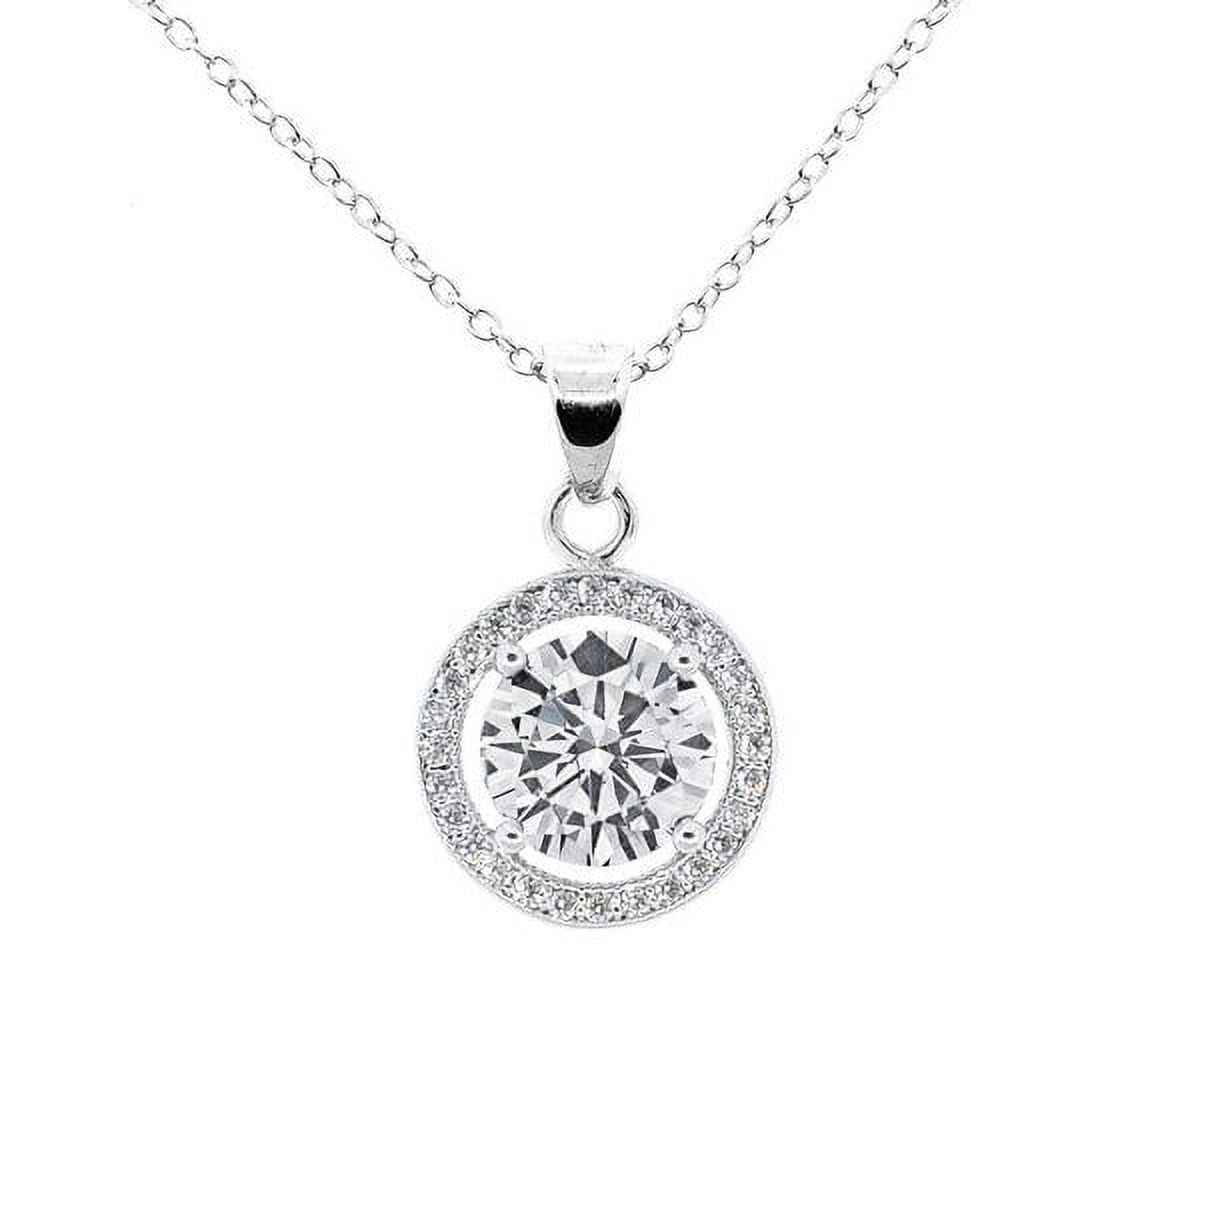 Cate & Chloe Blake 18k White Gold Plated Silver Halo Necklace | CZ Crystal Necklace for Women, Gift for Her - image 1 of 8